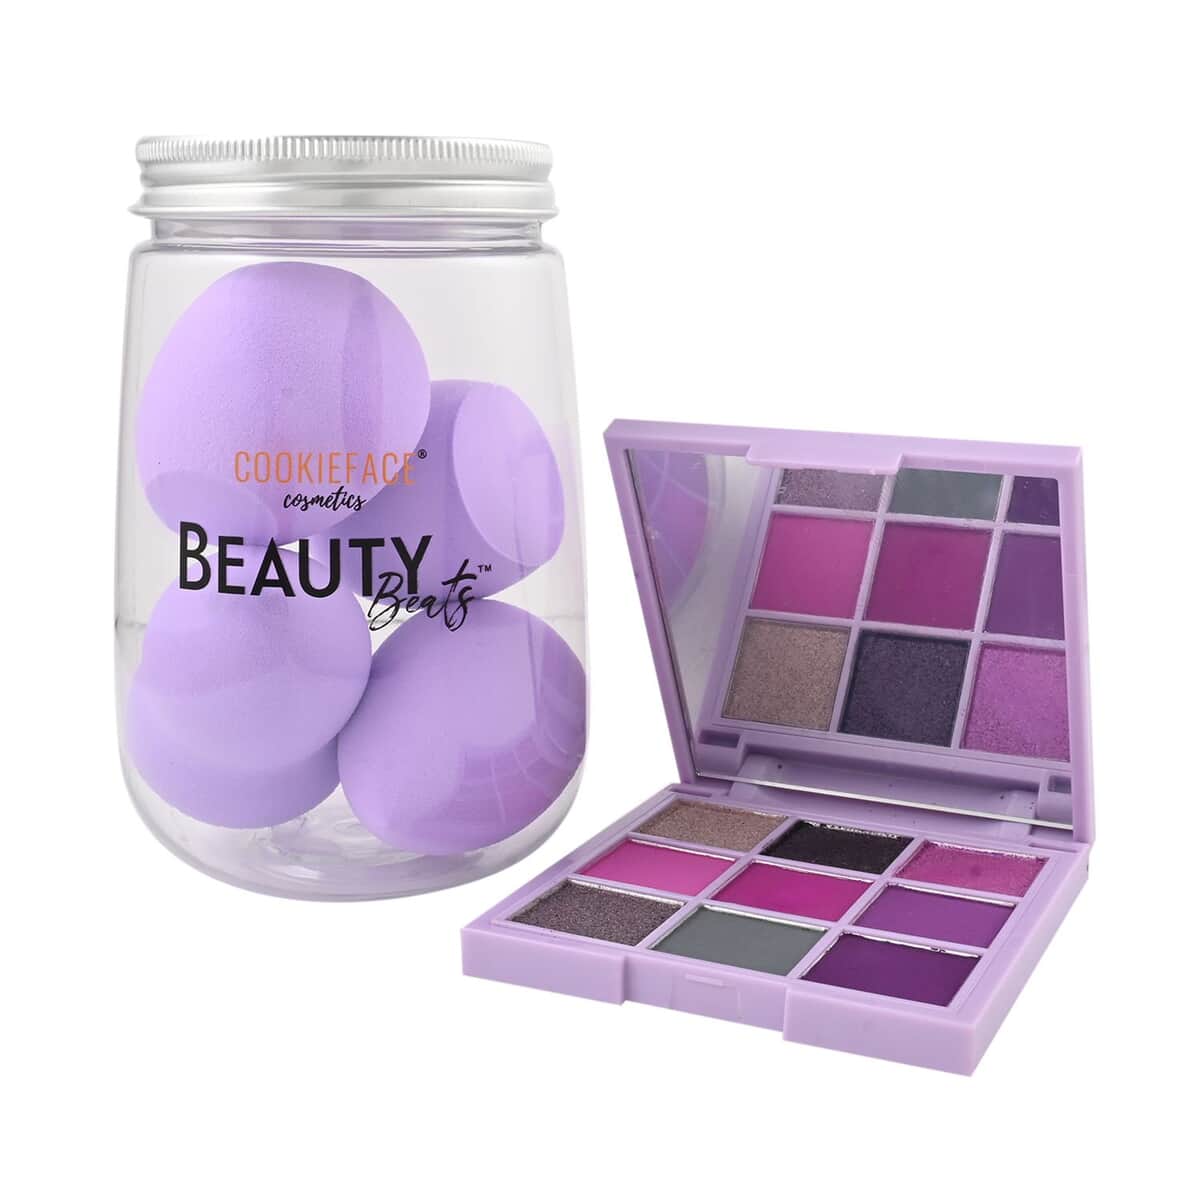 Buy CookieFace Cosmetics- Pinch of Purple Cookie Couture Eye Shadow Palette and Beats Set | Makeup Beauty Set | Eyebrow Kit | Makeup Gift Sets Kit Box at ShopLC.